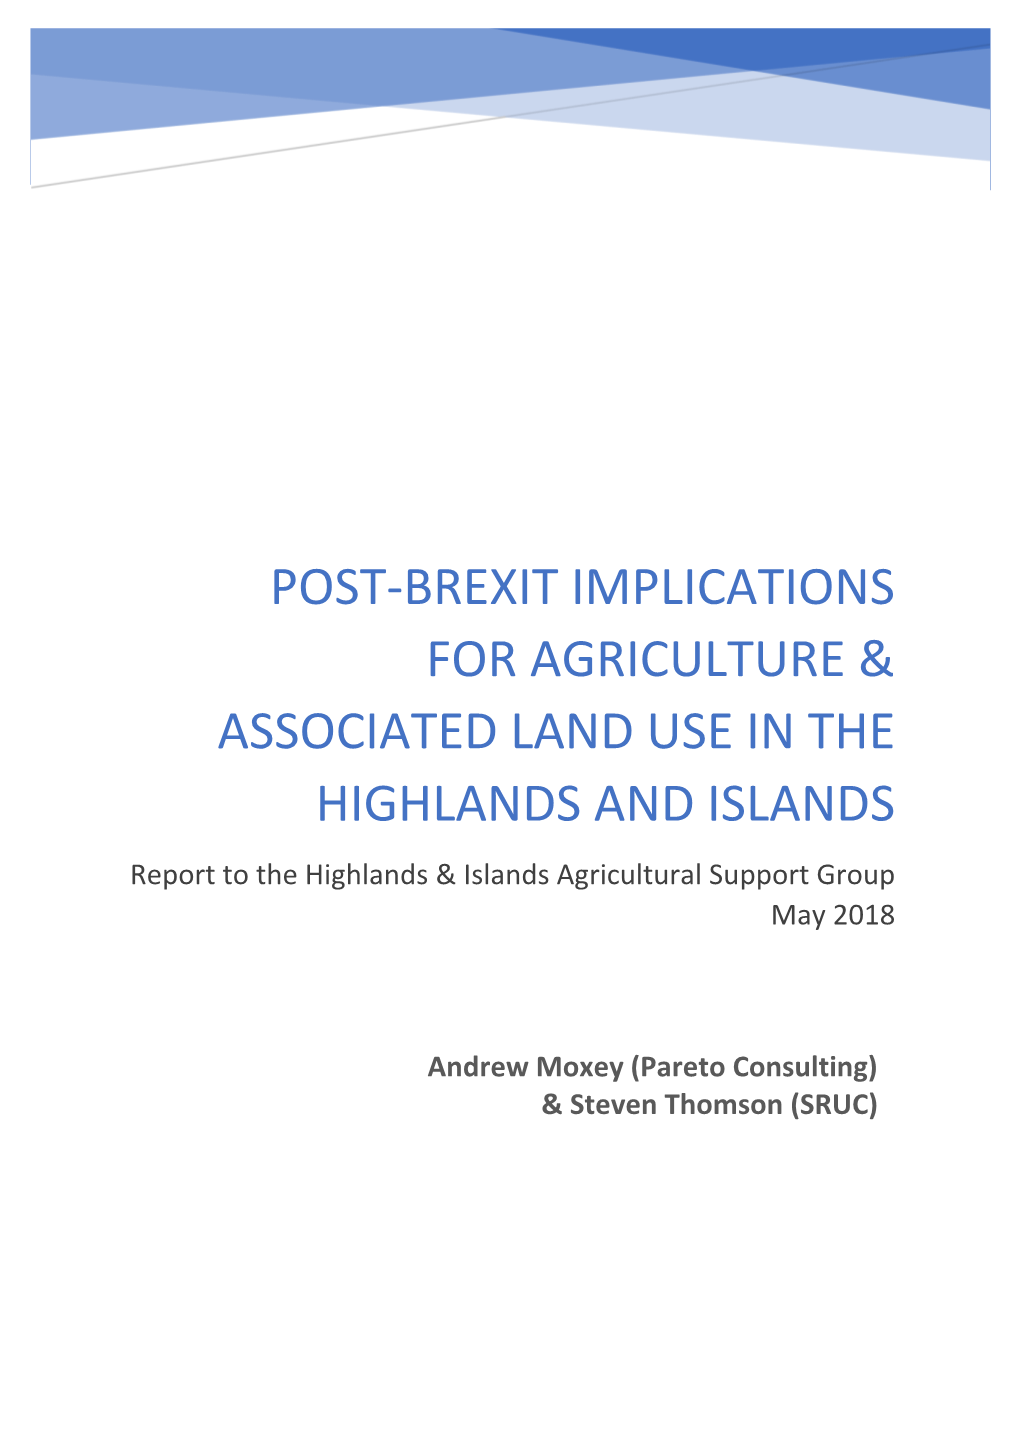 Post-Brexit Implications for Agriculture & Associated Land Use in the Highlands and Islands